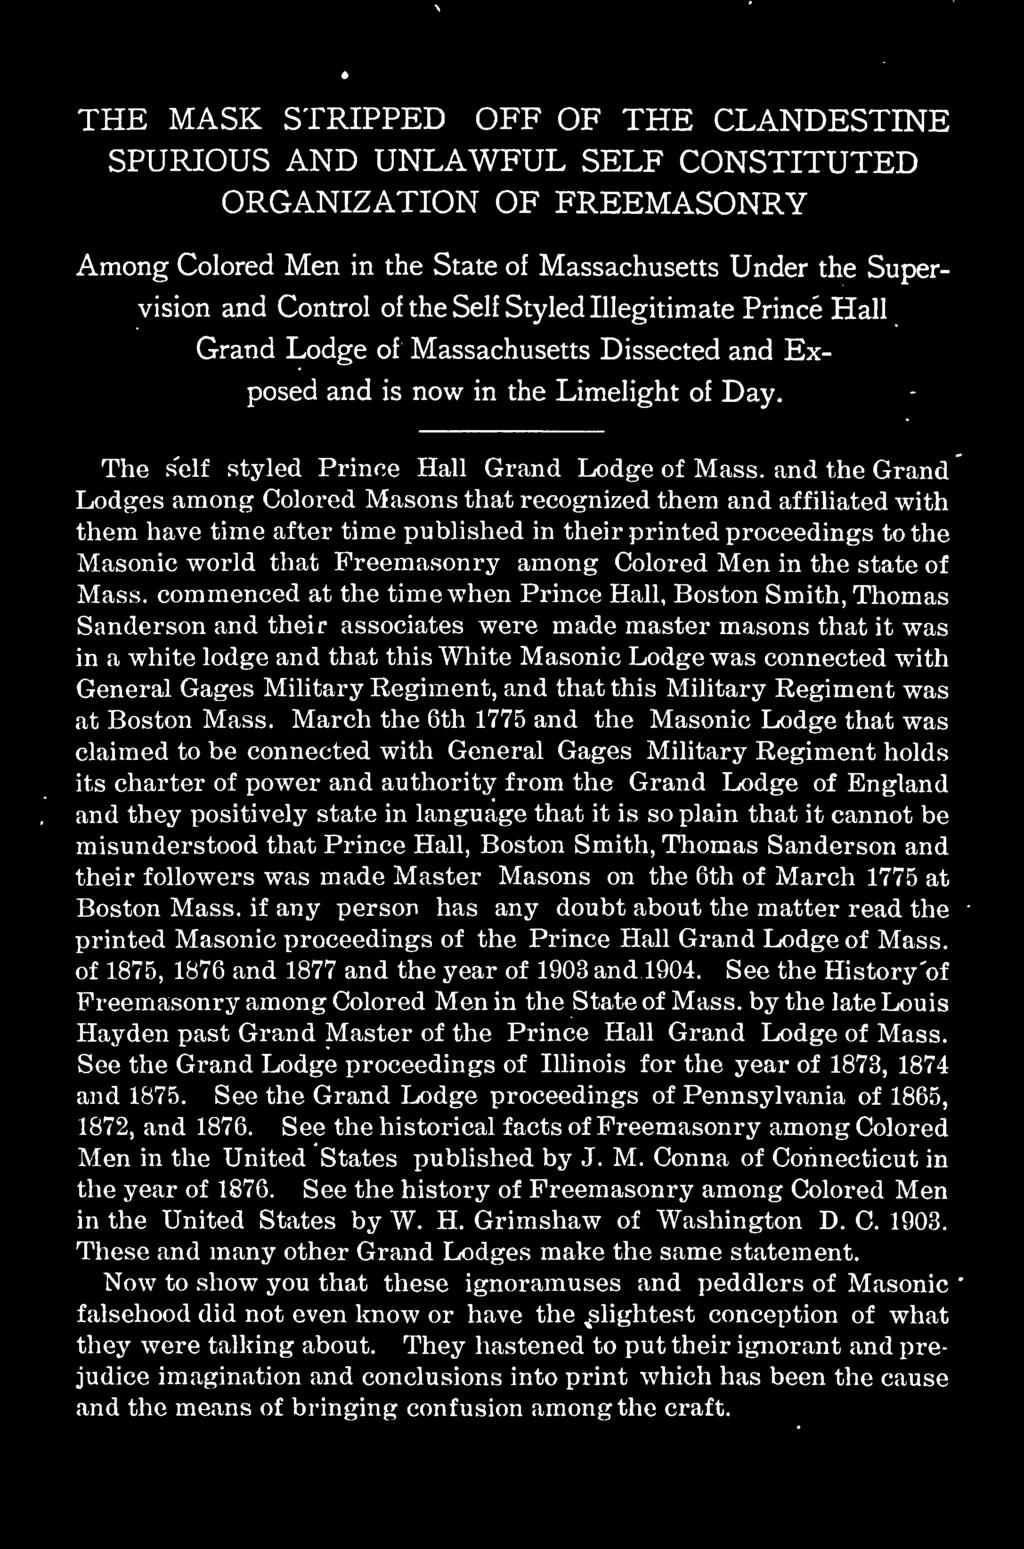 commenced at the time when Prince Hall, Boston Smith, Thomas Sanderson and their associates were made master masons that it was in a white lodge and that this White Masonic Lodge was connected with